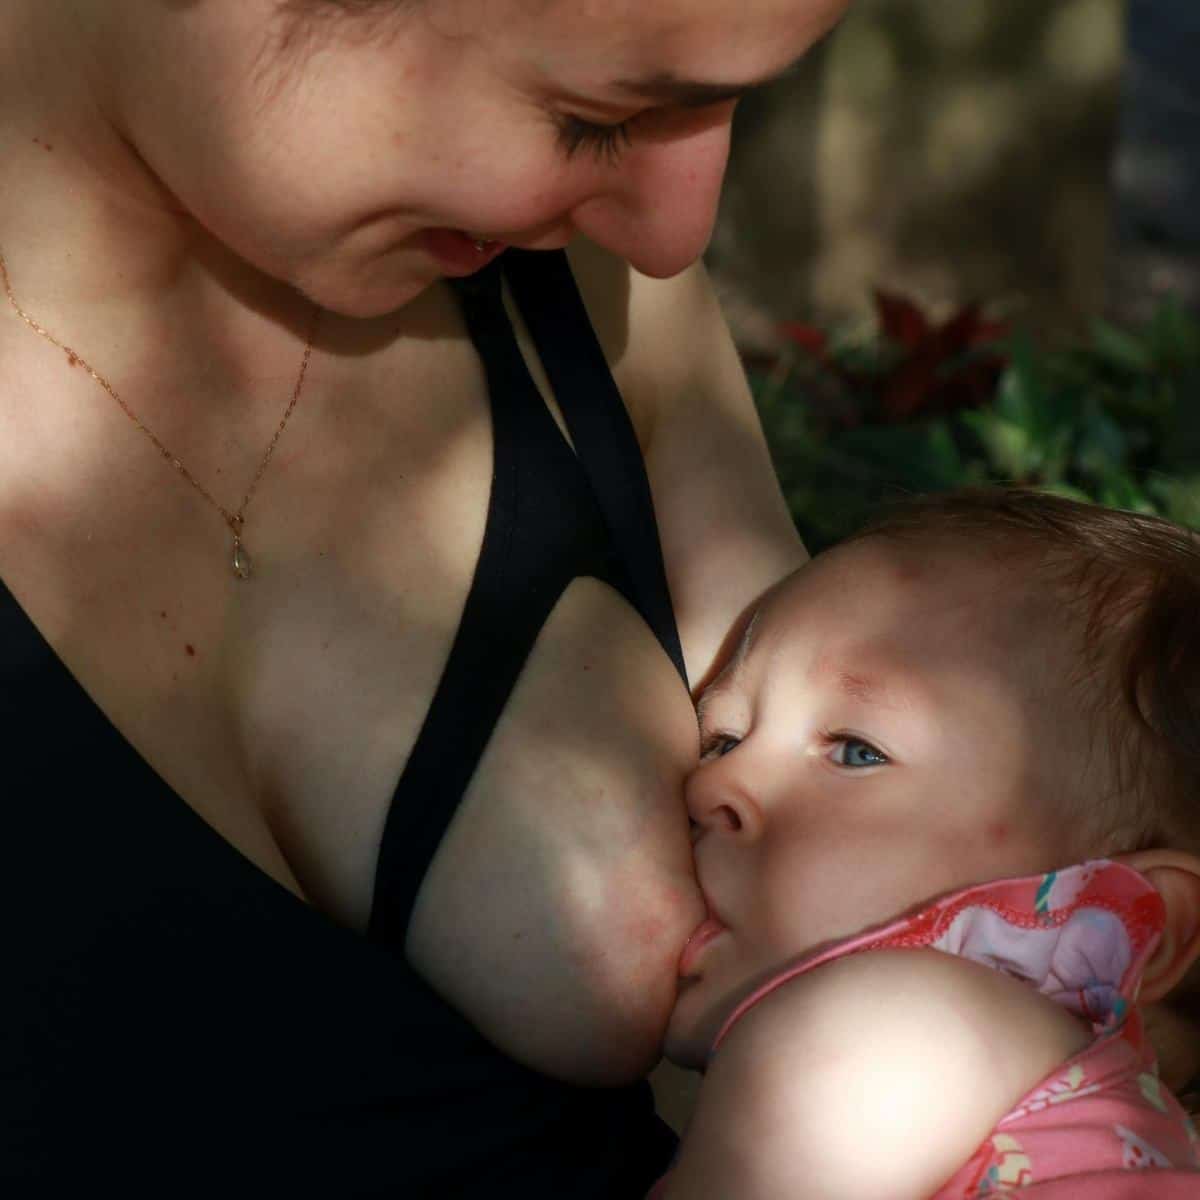 baby is breastfeeding from mother's left breast